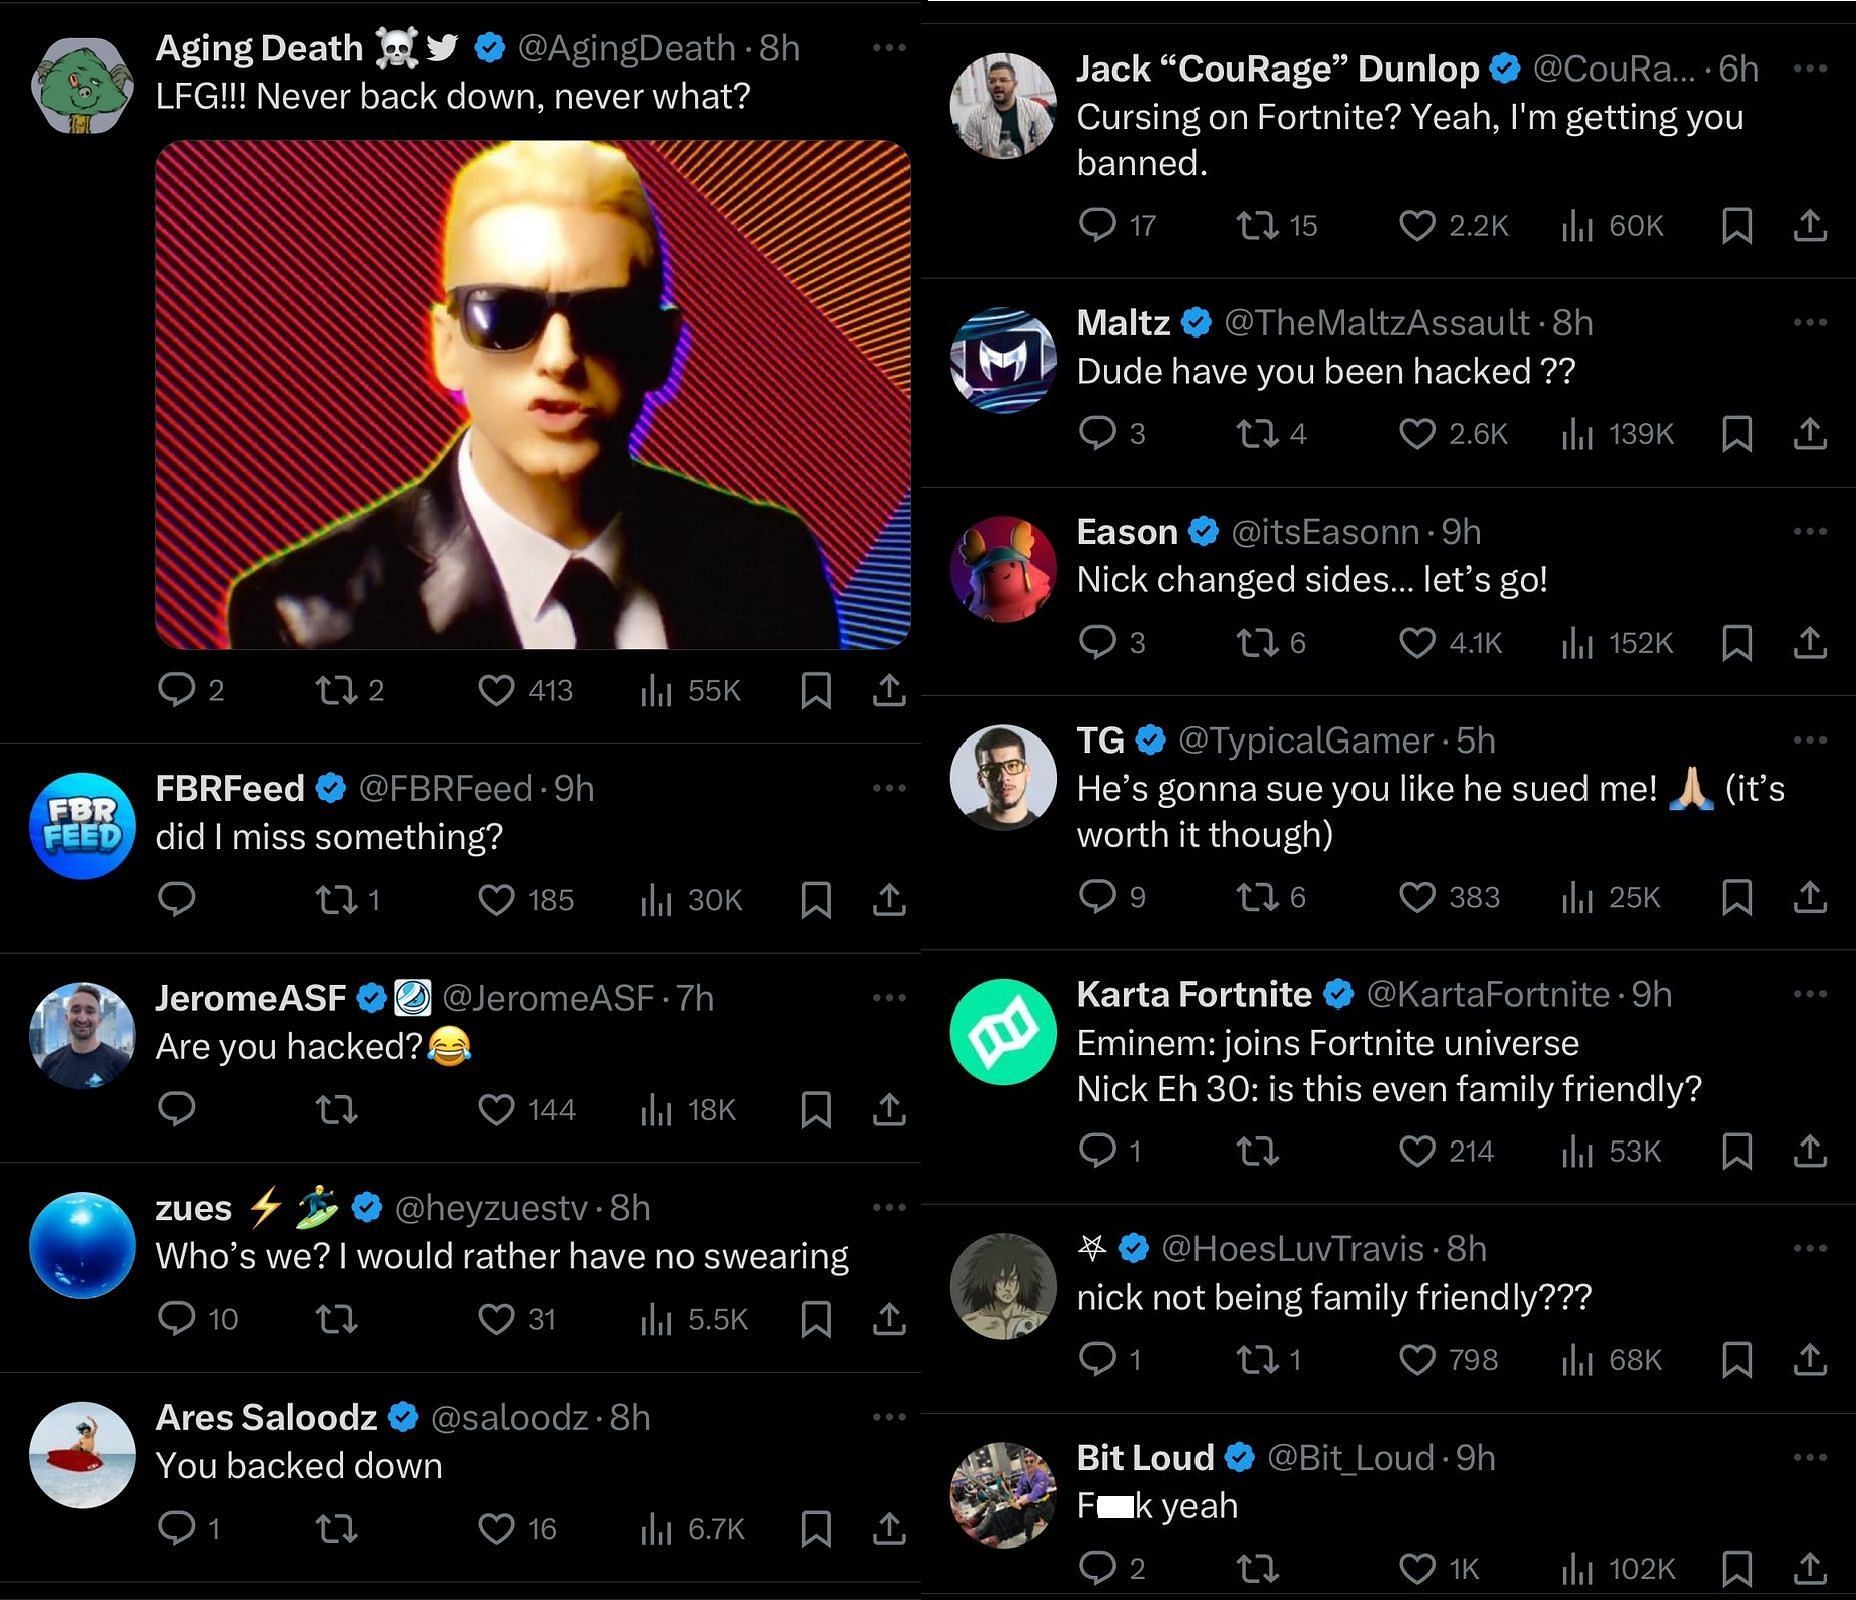 Fans react to Nick Eh 30&#039;s unusual request (Image via X/@NickEh30)